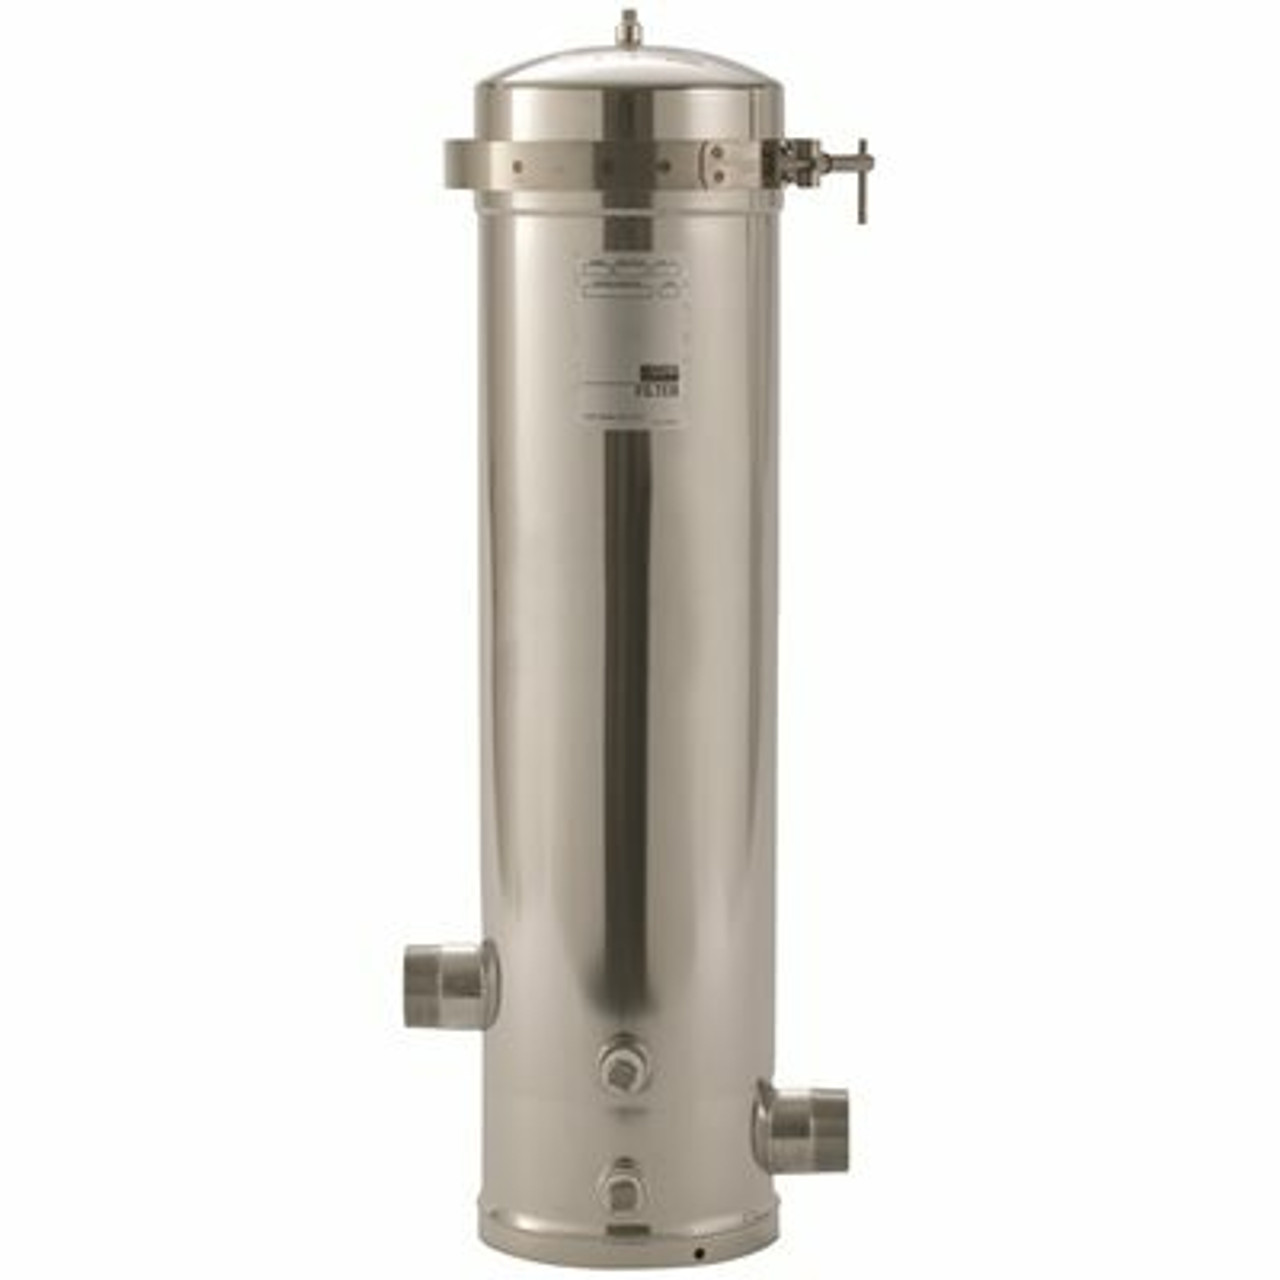 3M Aqua-Pure Ss12 Epe-316L Large Diameter Stainless Steel Water Filter Housing